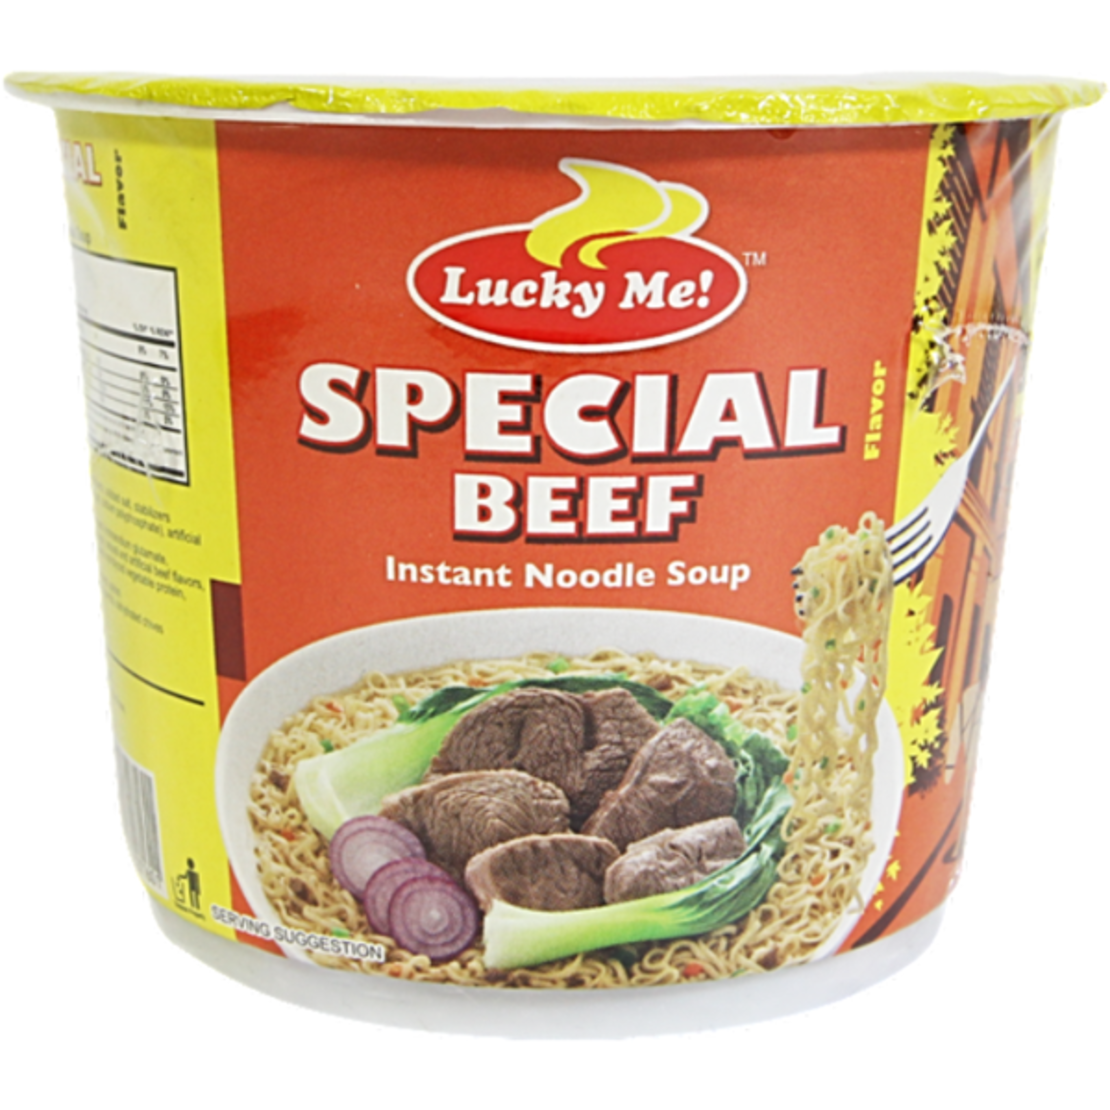 Lucky me - Special Beef - instand Noodle soup